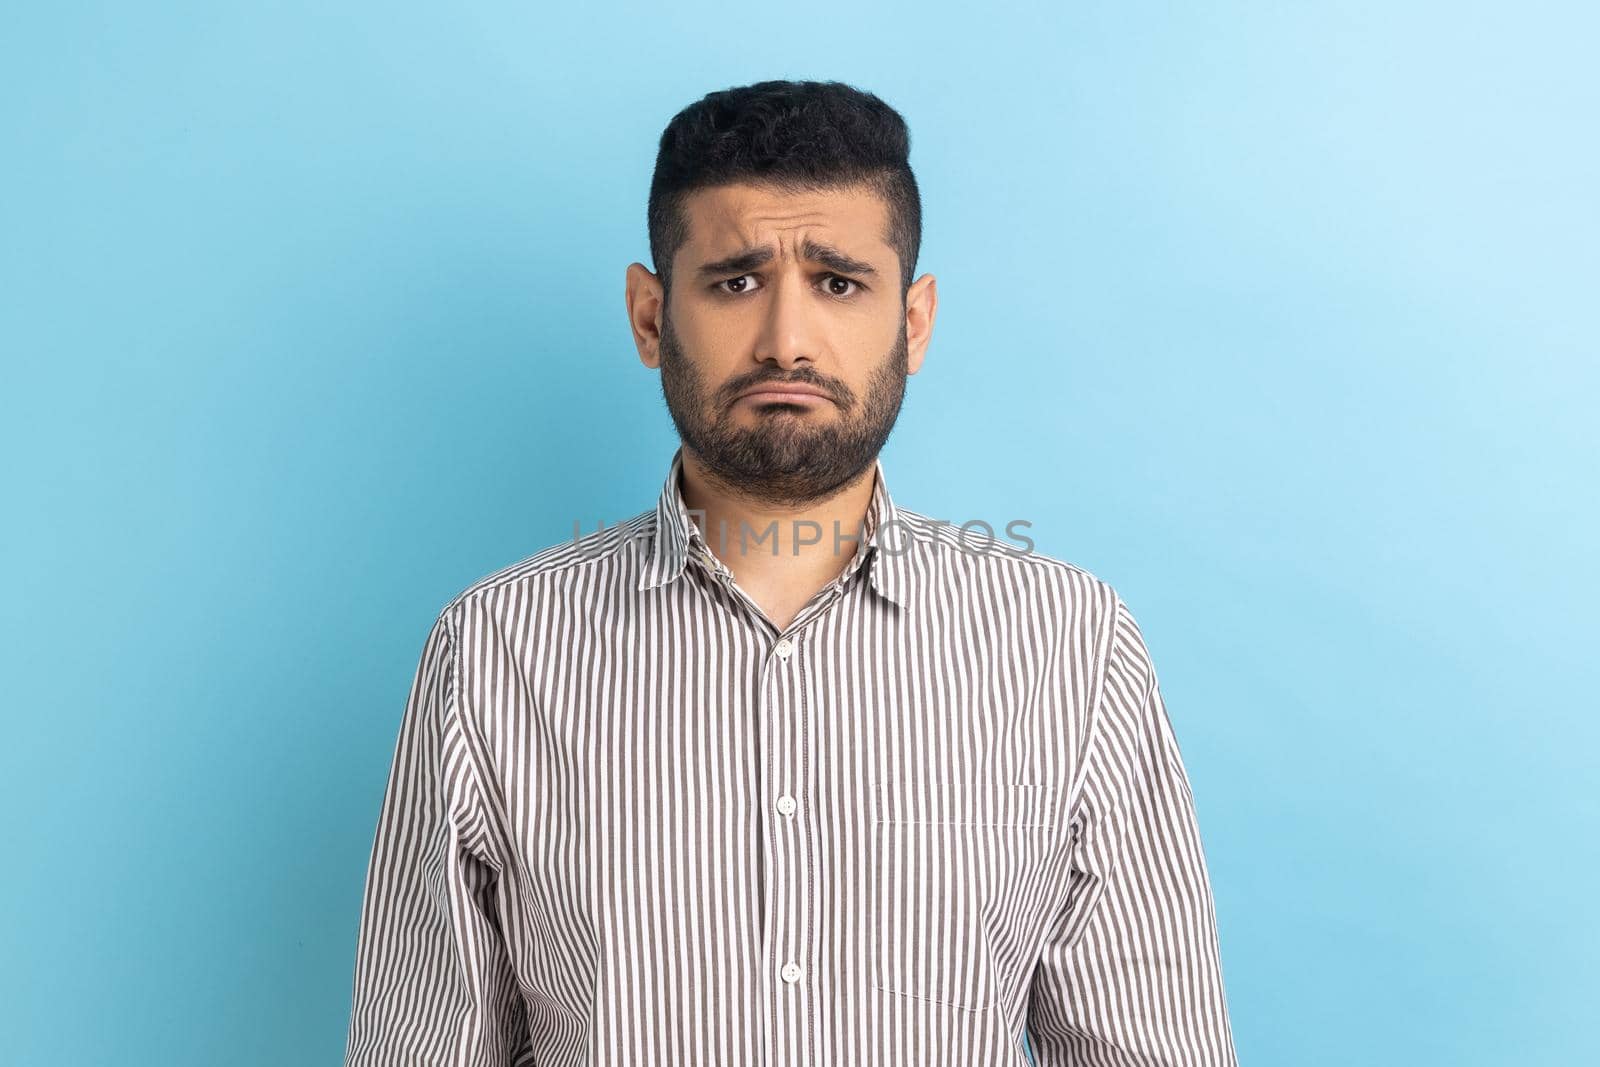 Bearded upset businessman standing and looking at camera with dissatisfied sadness face, expressing sorrow, having bad mood, wearing striped shirt. Indoor studio shot isolated on blue background.